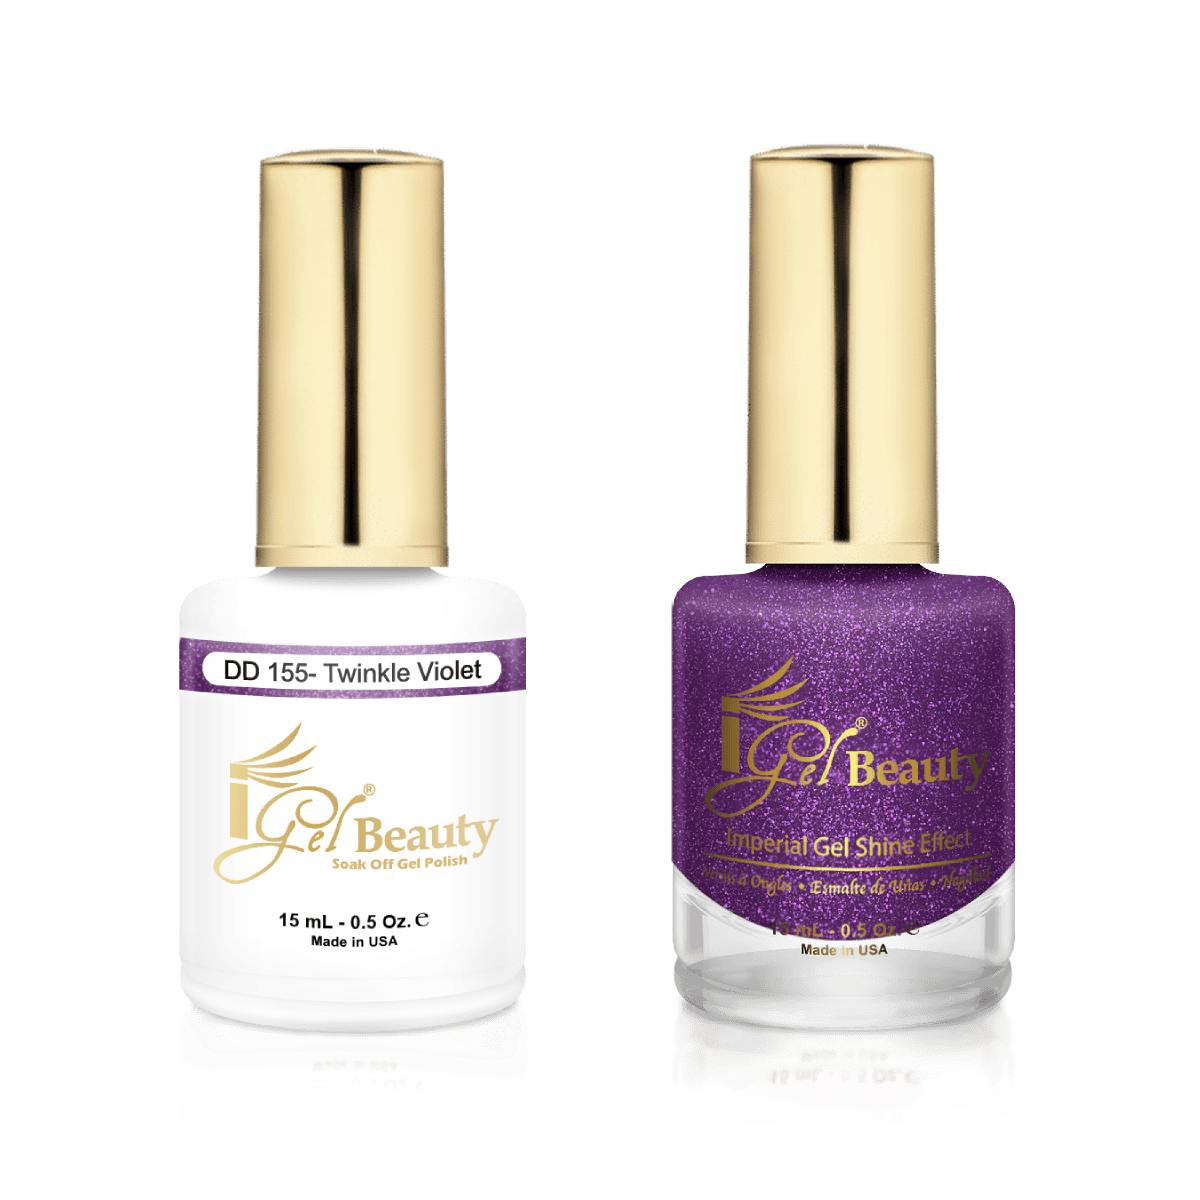 IGel Duo Gel Polish + Matching Nail Lacquer DD 155 TWINKLE VIOLET